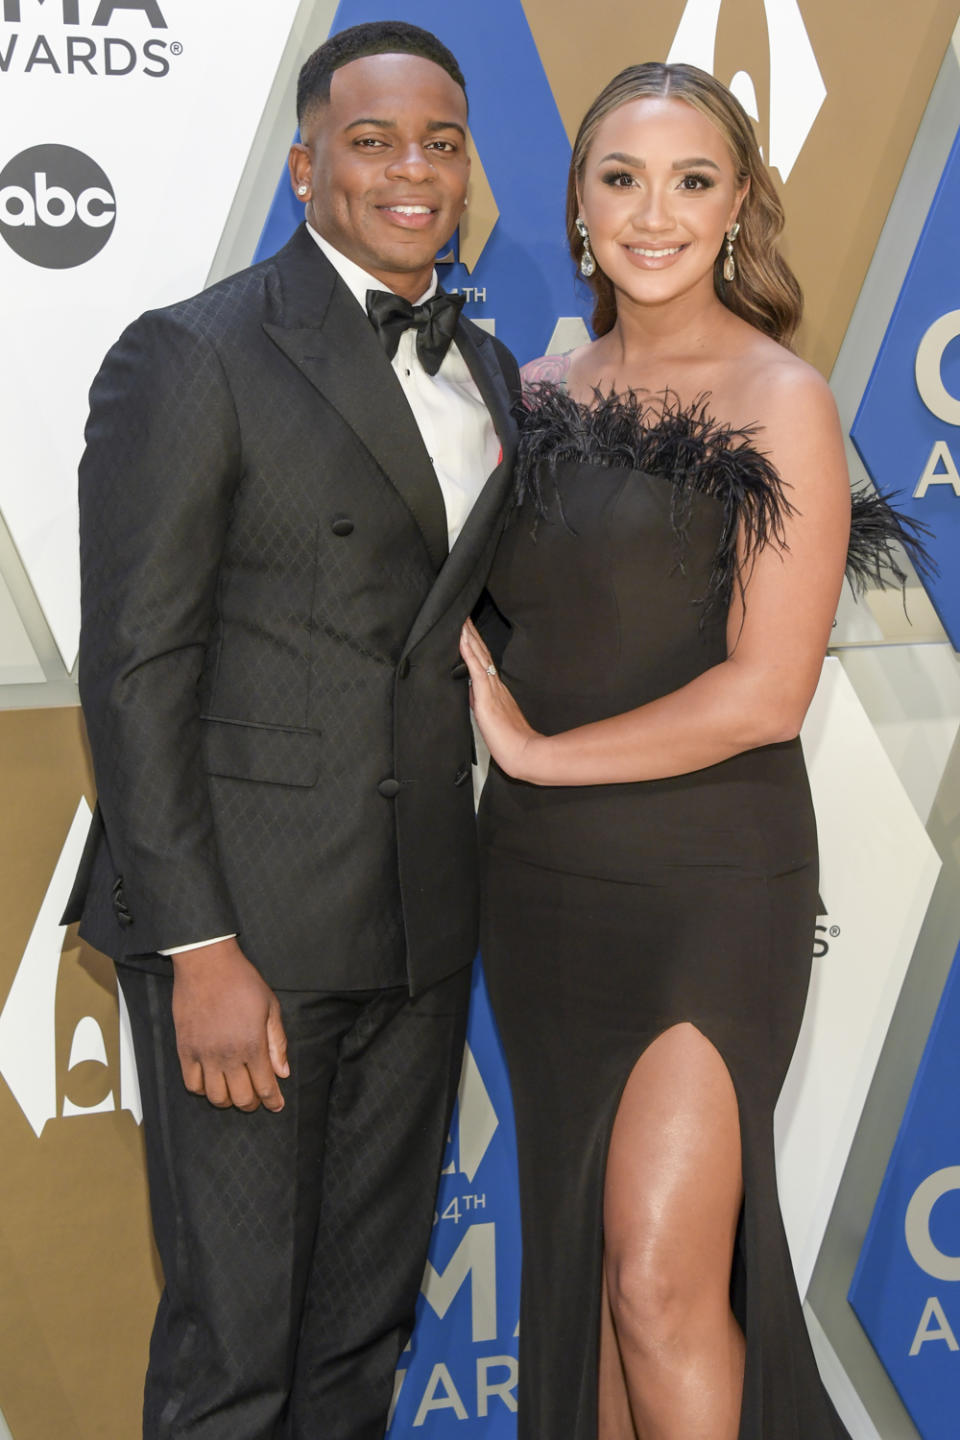 <p>The country singer and his fiancée said "I do" on May 27 at <a href="http://www.thelhi.com/" rel="nofollow noopener" target="_blank" data-ylk="slk:The Lake House Inn;elm:context_link;itc:0;sec:content-canvas" class="link ">The Lake House Inn</a> in Perkasie, Pennsylvania, <a href="https://people.com/country/jimmie-allen-marries-alexis-gale/" rel="nofollow noopener" target="_blank" data-ylk="slk:PEOPLE confirmed;elm:context_link;itc:0;sec:content-canvas" class="link ">PEOPLE confirmed</a>.</p> <p>The "Best Shot" crooner, 34, and Gale, a nurse, celebrated their nuptials with family and friends, including fellow country singer-songwriters <a href="https://people.com/tag/darius-rucker/" rel="nofollow noopener" target="_blank" data-ylk="slk:Darius Rucker;elm:context_link;itc:0;sec:content-canvas" class="link ">Darius Rucker</a>, <a href="https://people.com/country/tyler-rich-sabina-gadecki-wedding-photos/" rel="nofollow noopener" target="_blank" data-ylk="slk:Tyler Rich;elm:context_link;itc:0;sec:content-canvas" class="link ">Tyler Rich</a> and wife <a href="https://people.com/country/tyler-rich-sabina-gadecki-brother-brain-cancer-diagnosis/" rel="nofollow noopener" target="_blank" data-ylk="slk:Sabina Gadecki;elm:context_link;itc:0;sec:content-canvas" class="link ">Sabina Gadecki</a>, and <a href="https://people.com/tag/chuck-wicks/" rel="nofollow noopener" target="_blank" data-ylk="slk:Chuck Wicks;elm:context_link;itc:0;sec:content-canvas" class="link ">Chuck Wicks</a> and wife <a href="https://people.com/parents/chuck-wicks-male-infertility-wife-kasi-pregnant-son-exclusive/" rel="nofollow noopener" target="_blank" data-ylk="slk:Kasi;elm:context_link;itc:0;sec:content-canvas" class="link ">Kasi</a>.</p> <p>The newlyweds are parents to <a href="https://people.com/parents/jimmie-allen-welcomes-daughter-naomi-betty-alexis-gale/" rel="nofollow noopener" target="_blank" data-ylk="slk:daughter Naomi Bettie;elm:context_link;itc:0;sec:content-canvas" class="link ">daughter Naomi Bettie</a>, 14 months, as well as Aadyn, Allen's 7-year-old son from a previous relationship. Their wedding was previously set for last year, and later postponed due to the pandemic. </p>